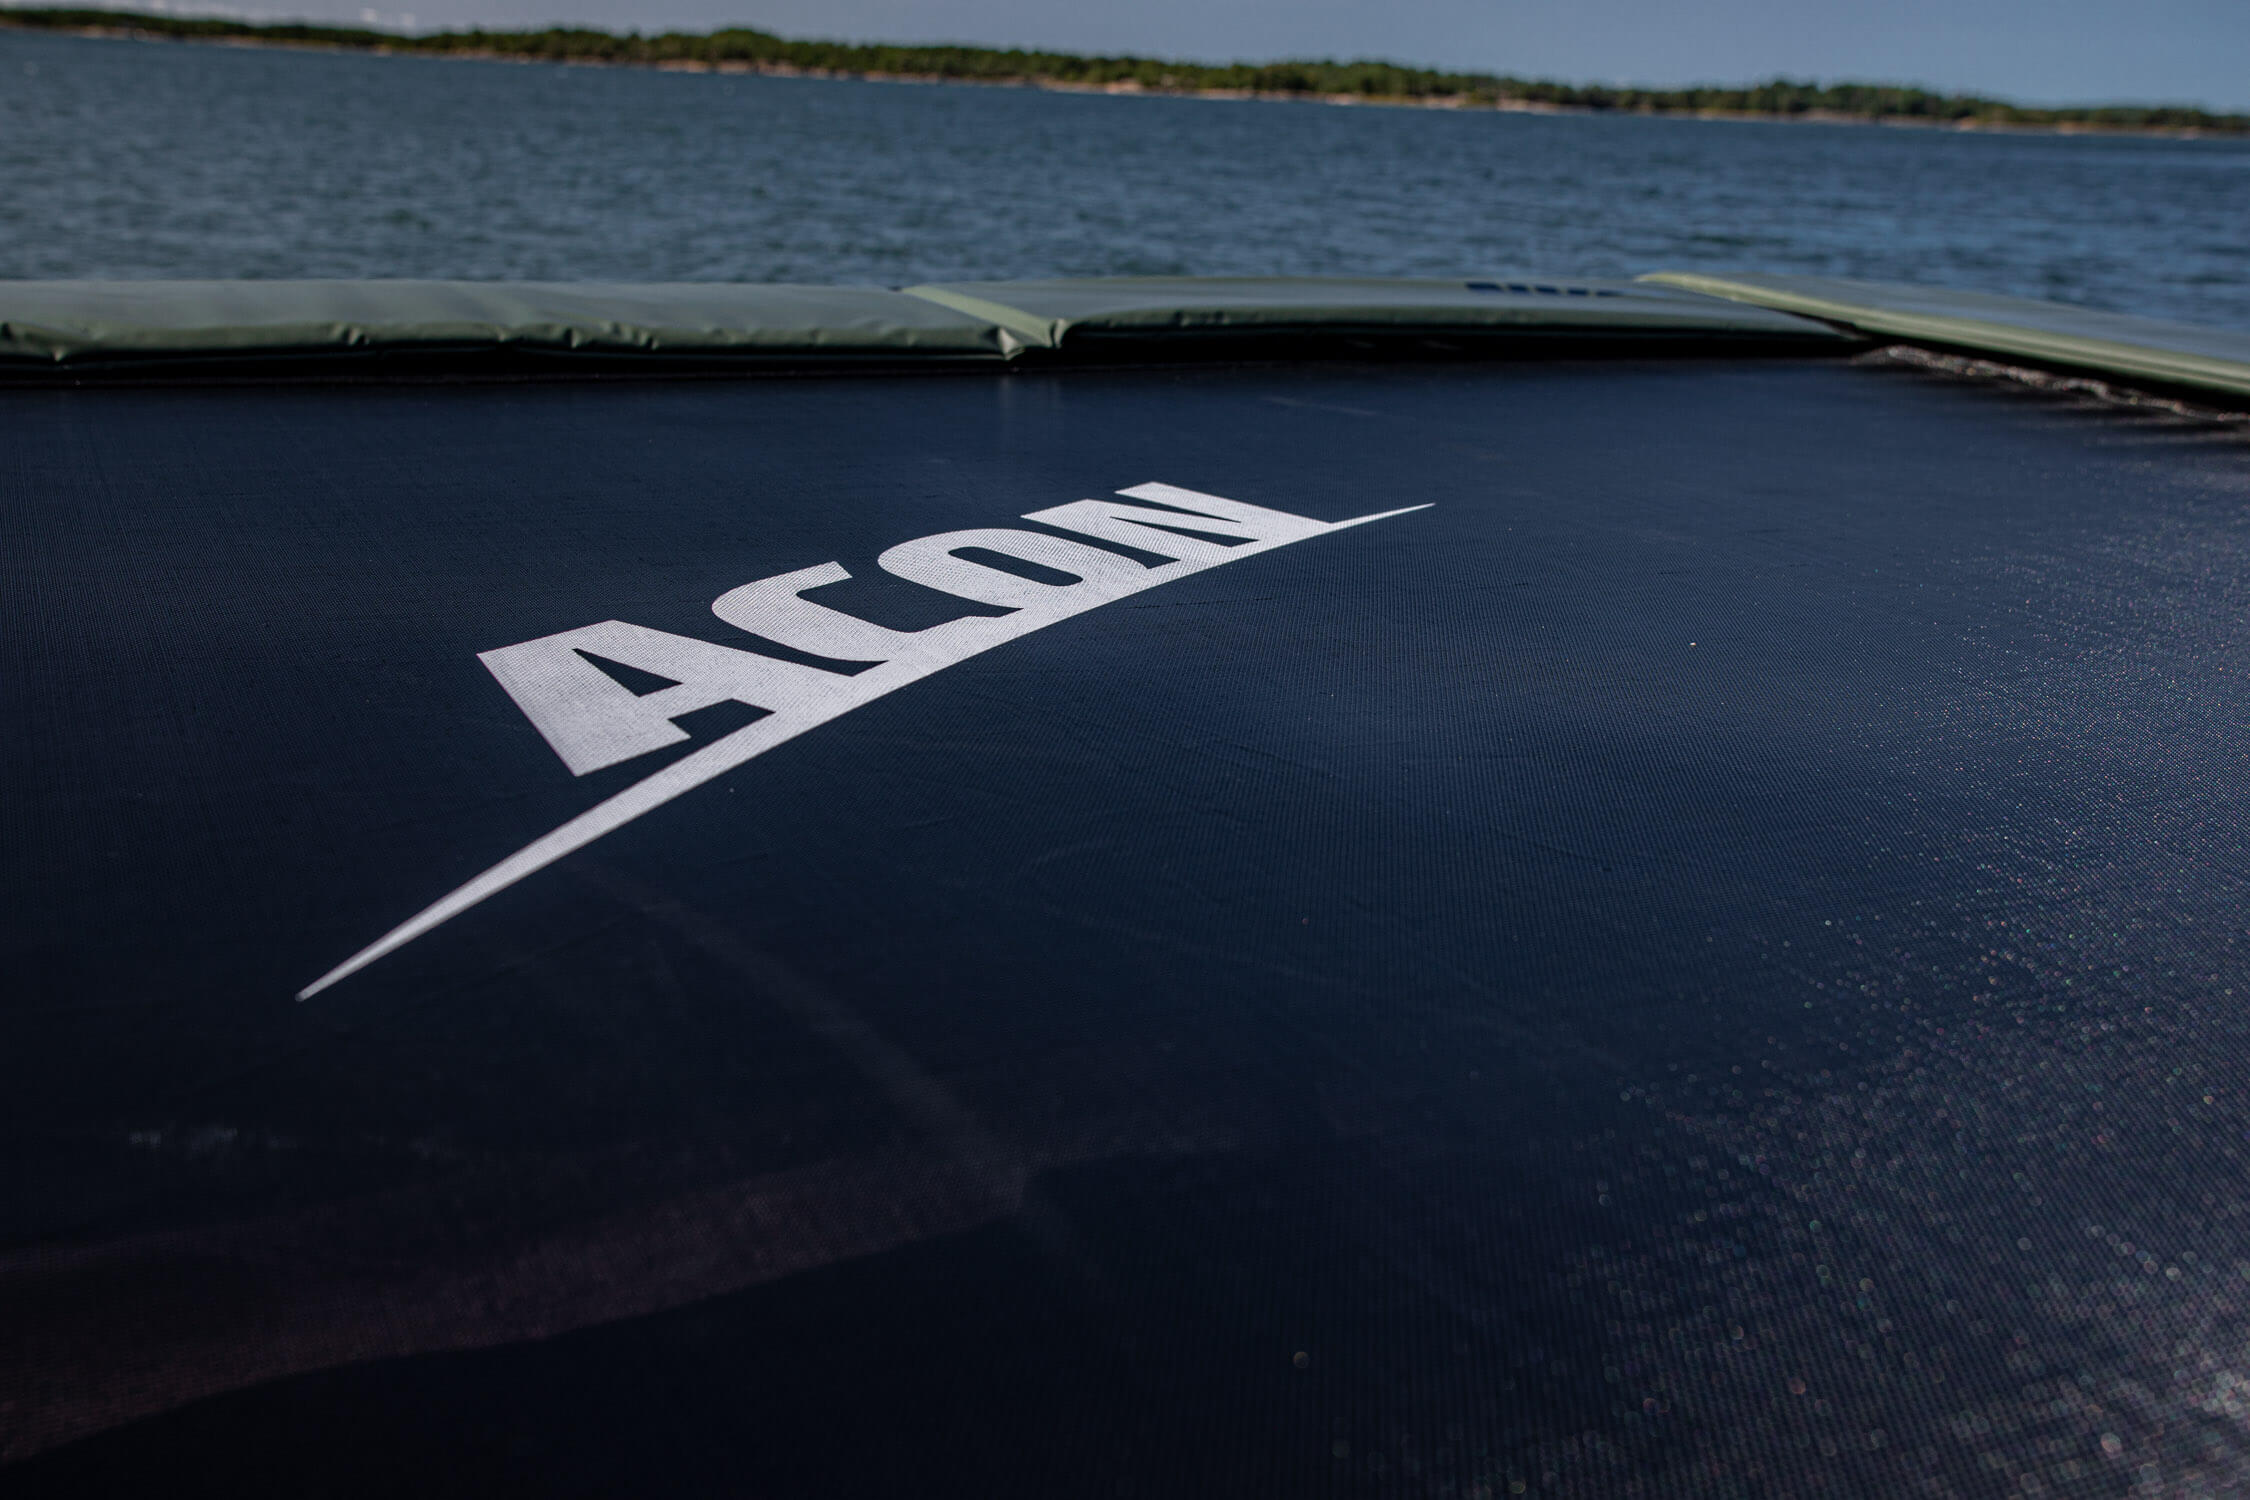 A close-up of ACON trampoline mat. The mat is black, the ACON logo is white and the paddings are green.